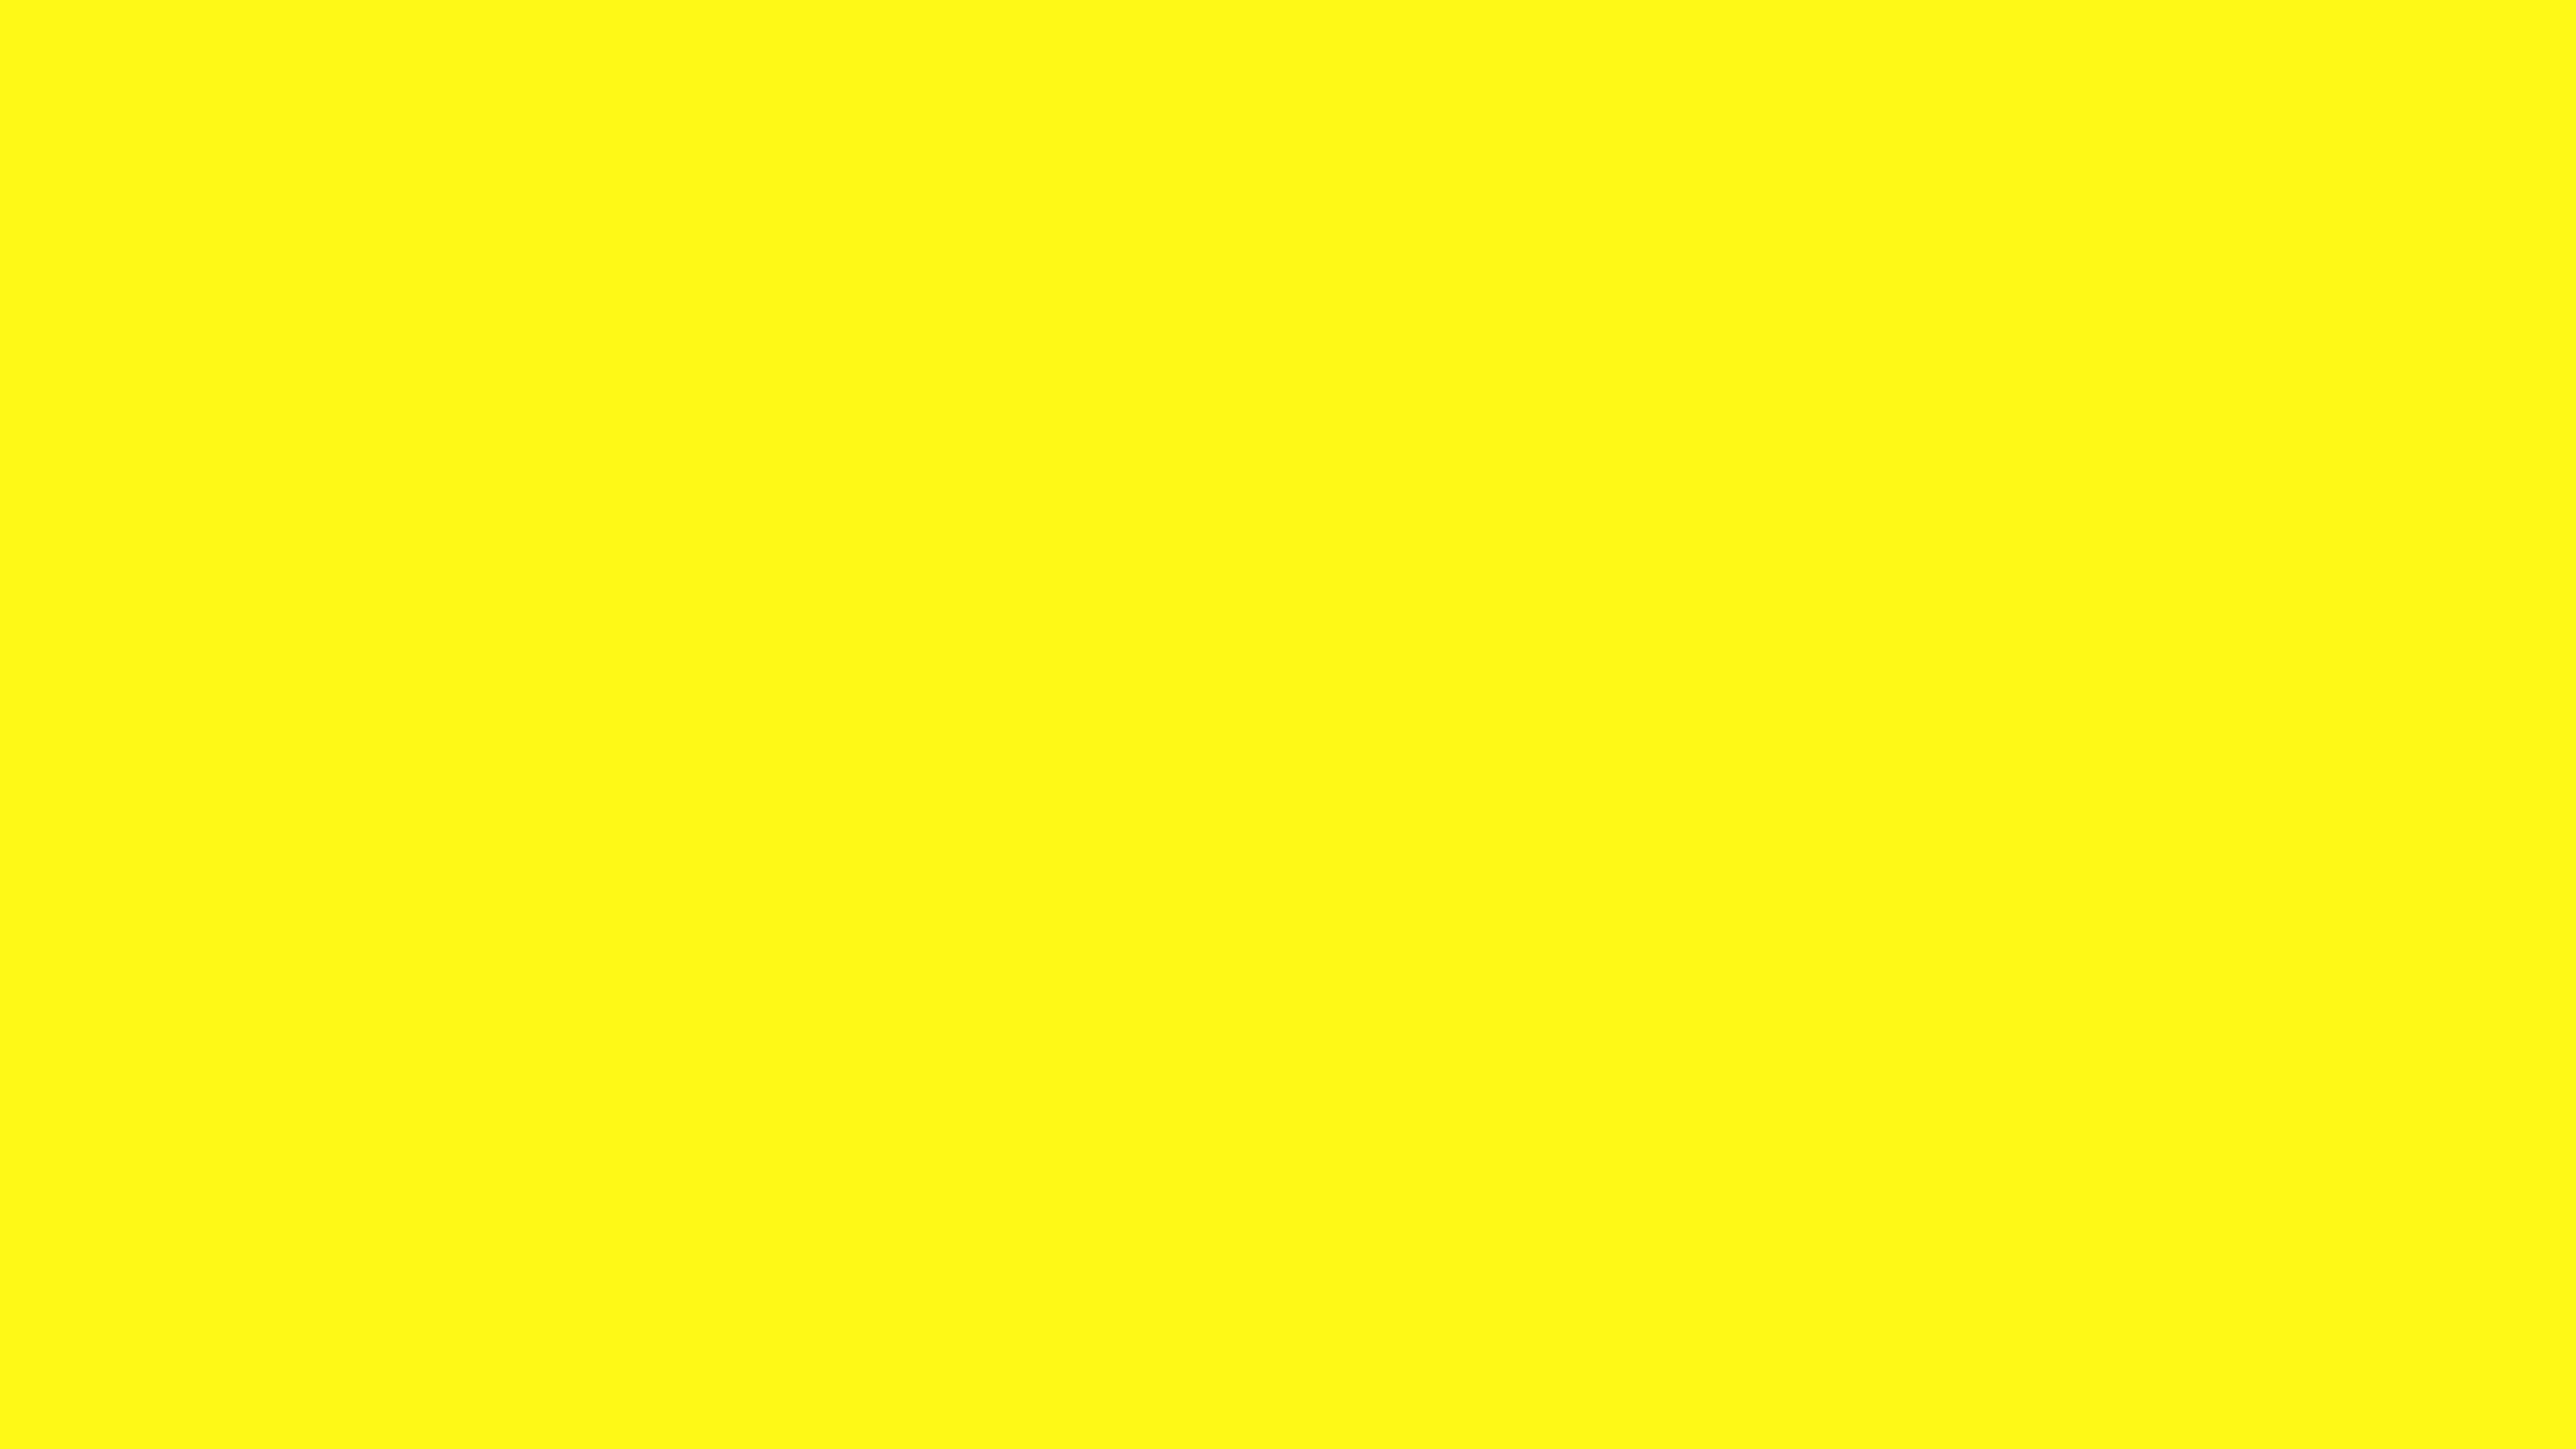 5. "Sunny Yellow" - A cheerful, sunny yellow color that will brighten up any day - wide 7